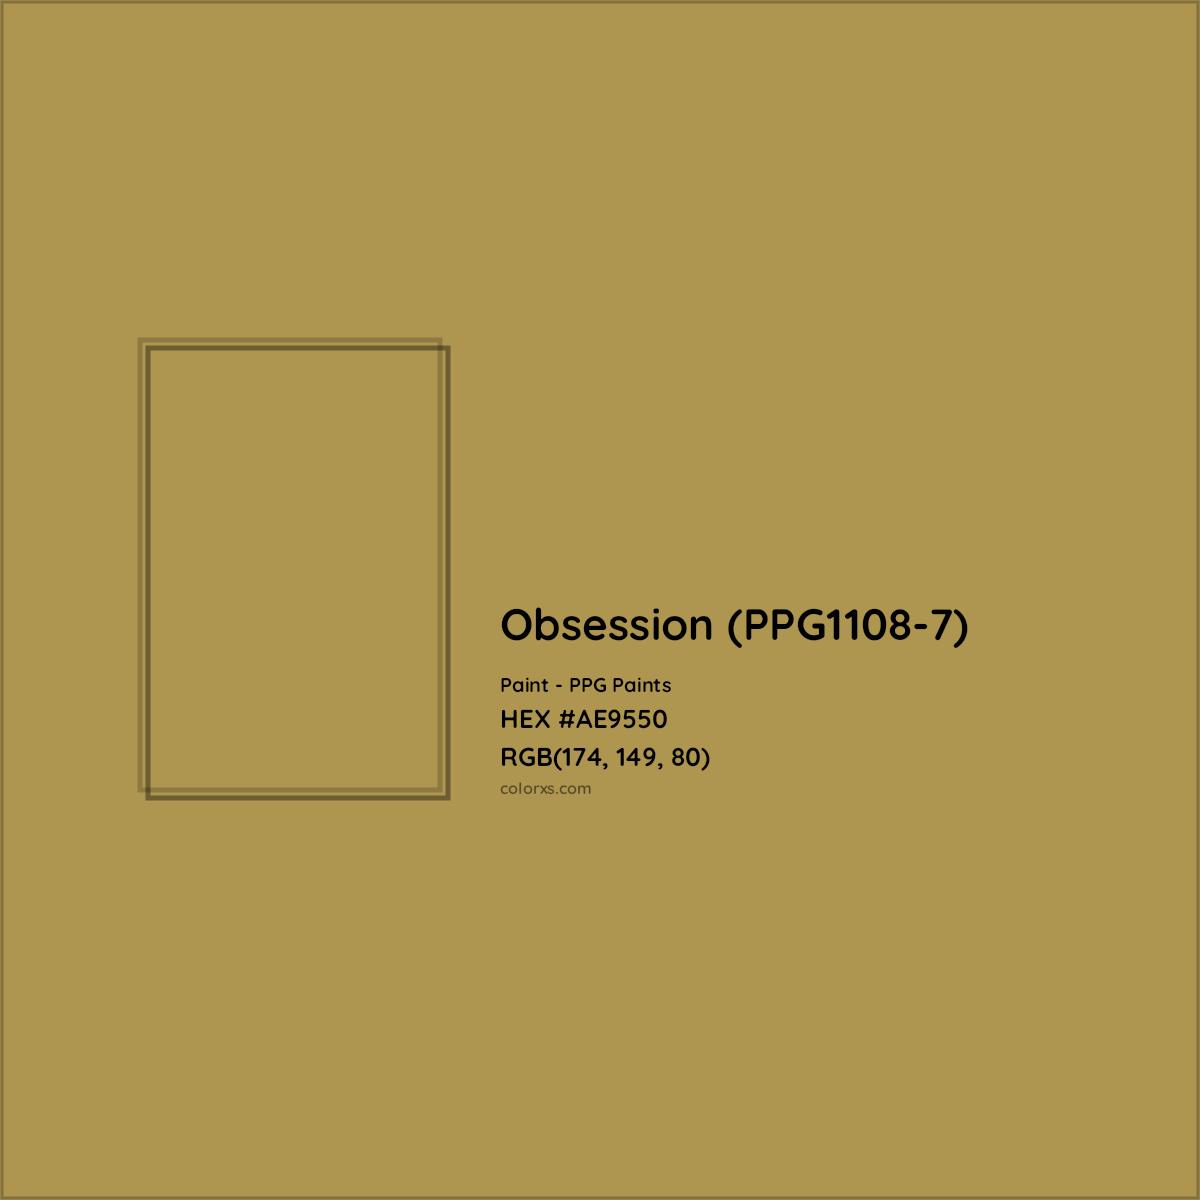 HEX #AE9550 Obsession (PPG1108-7) Paint PPG Paints - Color Code